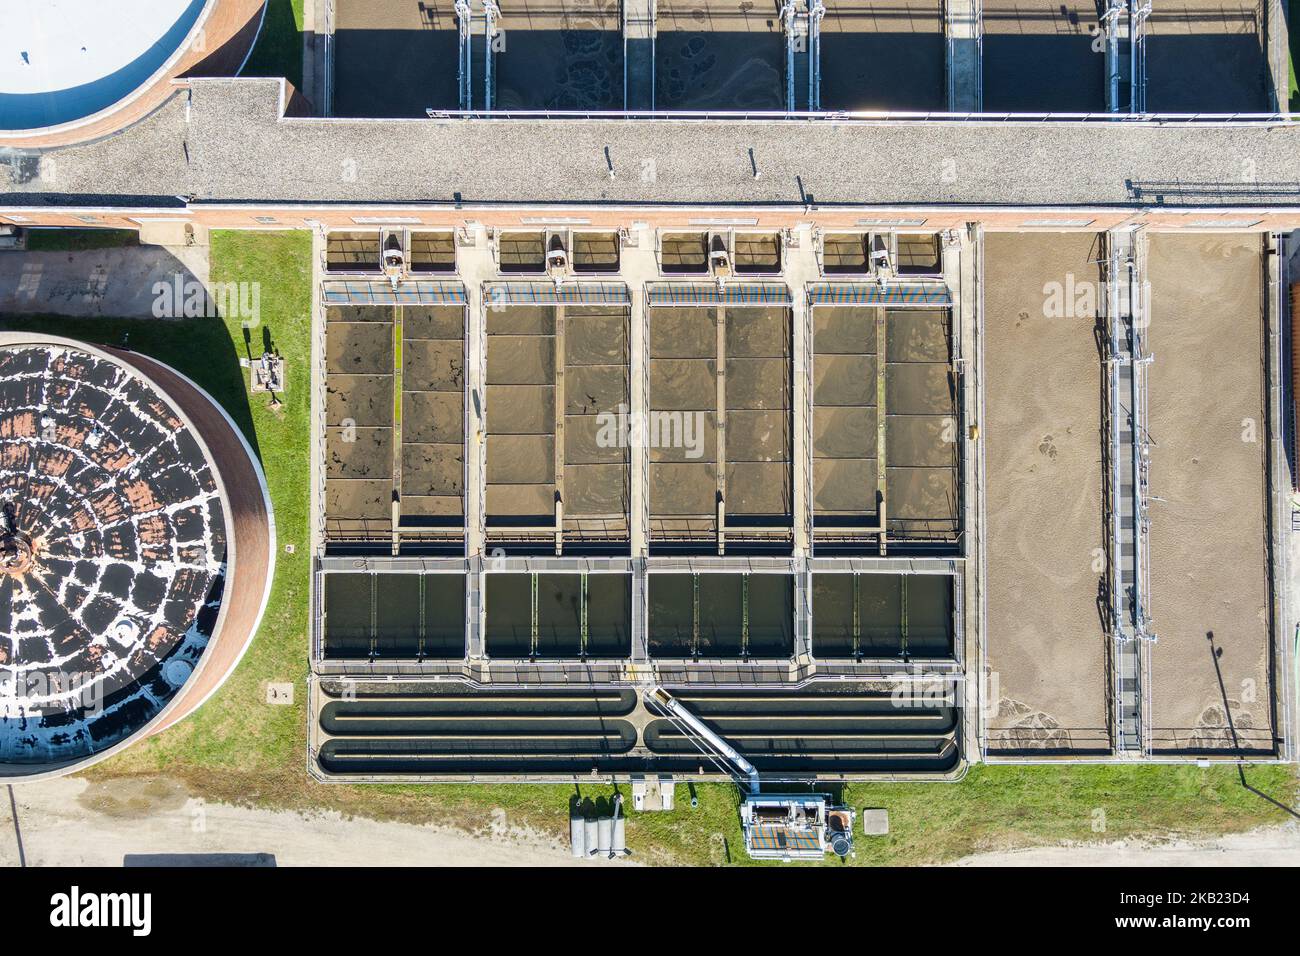 Aerial view of waste water treatment facility, Norristown, Pennsylvania, USA Stock Photo